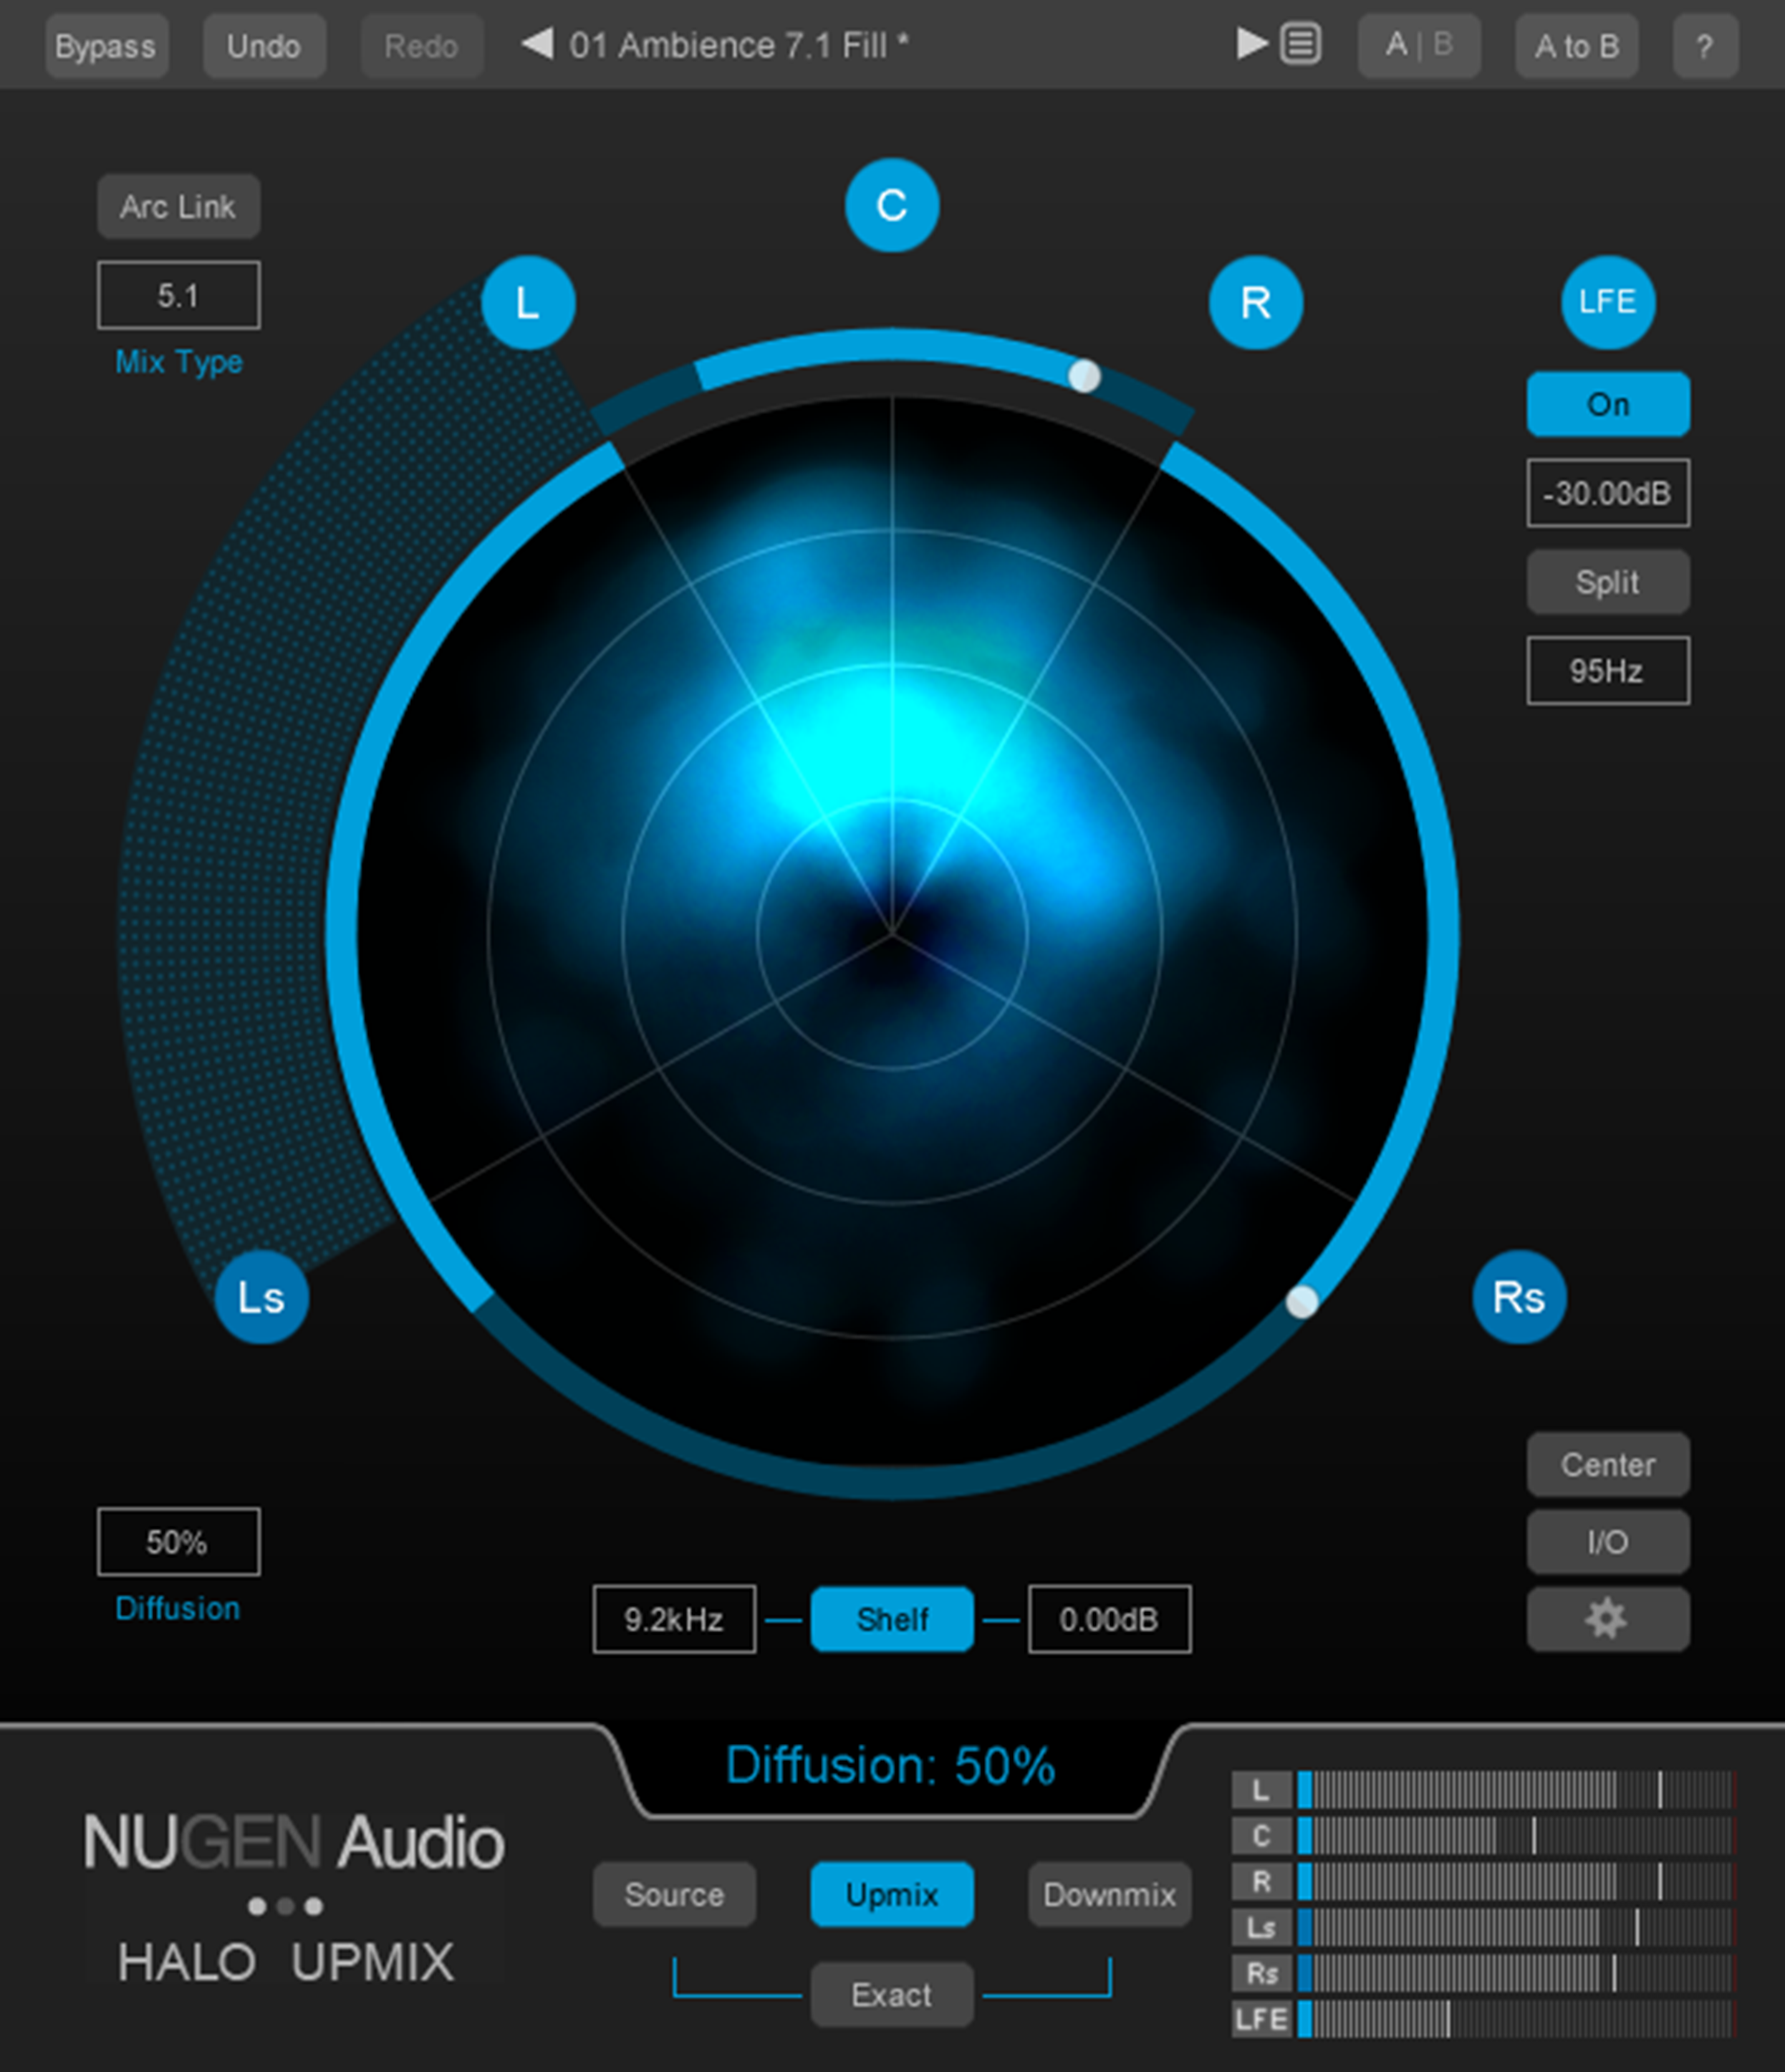 NUGEN Audio Halo Upmix with 3D Extension